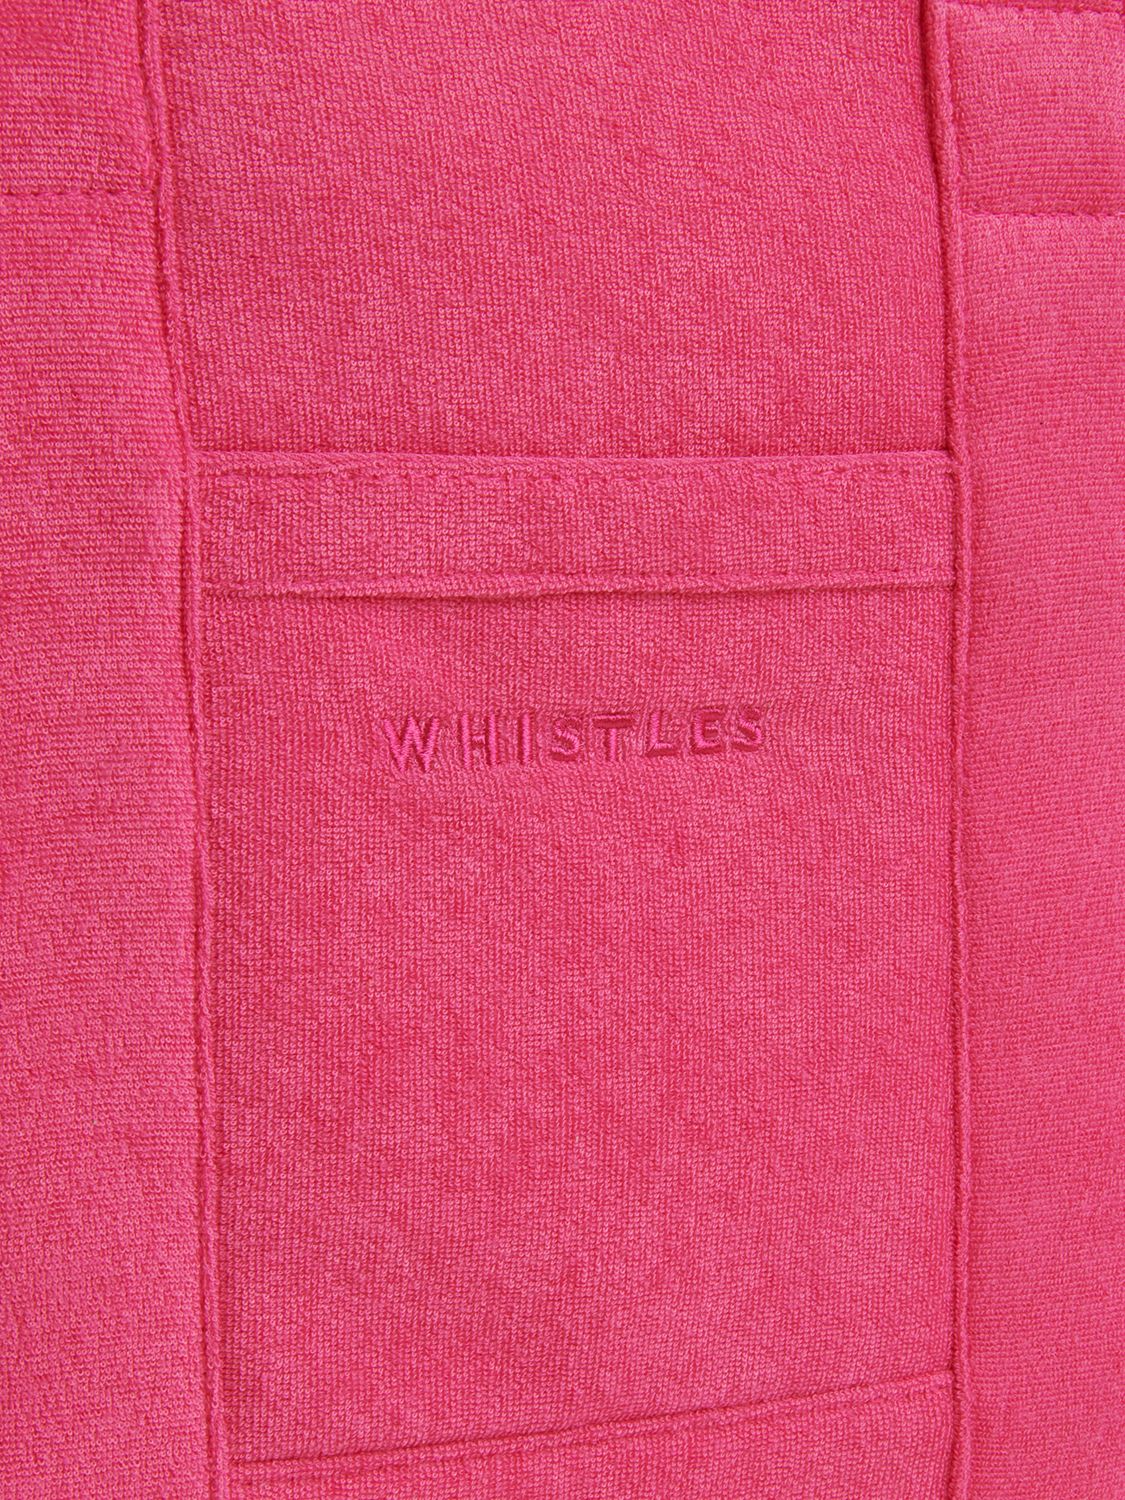 Whistles Penny Oversized Towelling Tote Bag, Pink at John Lewis & Partners